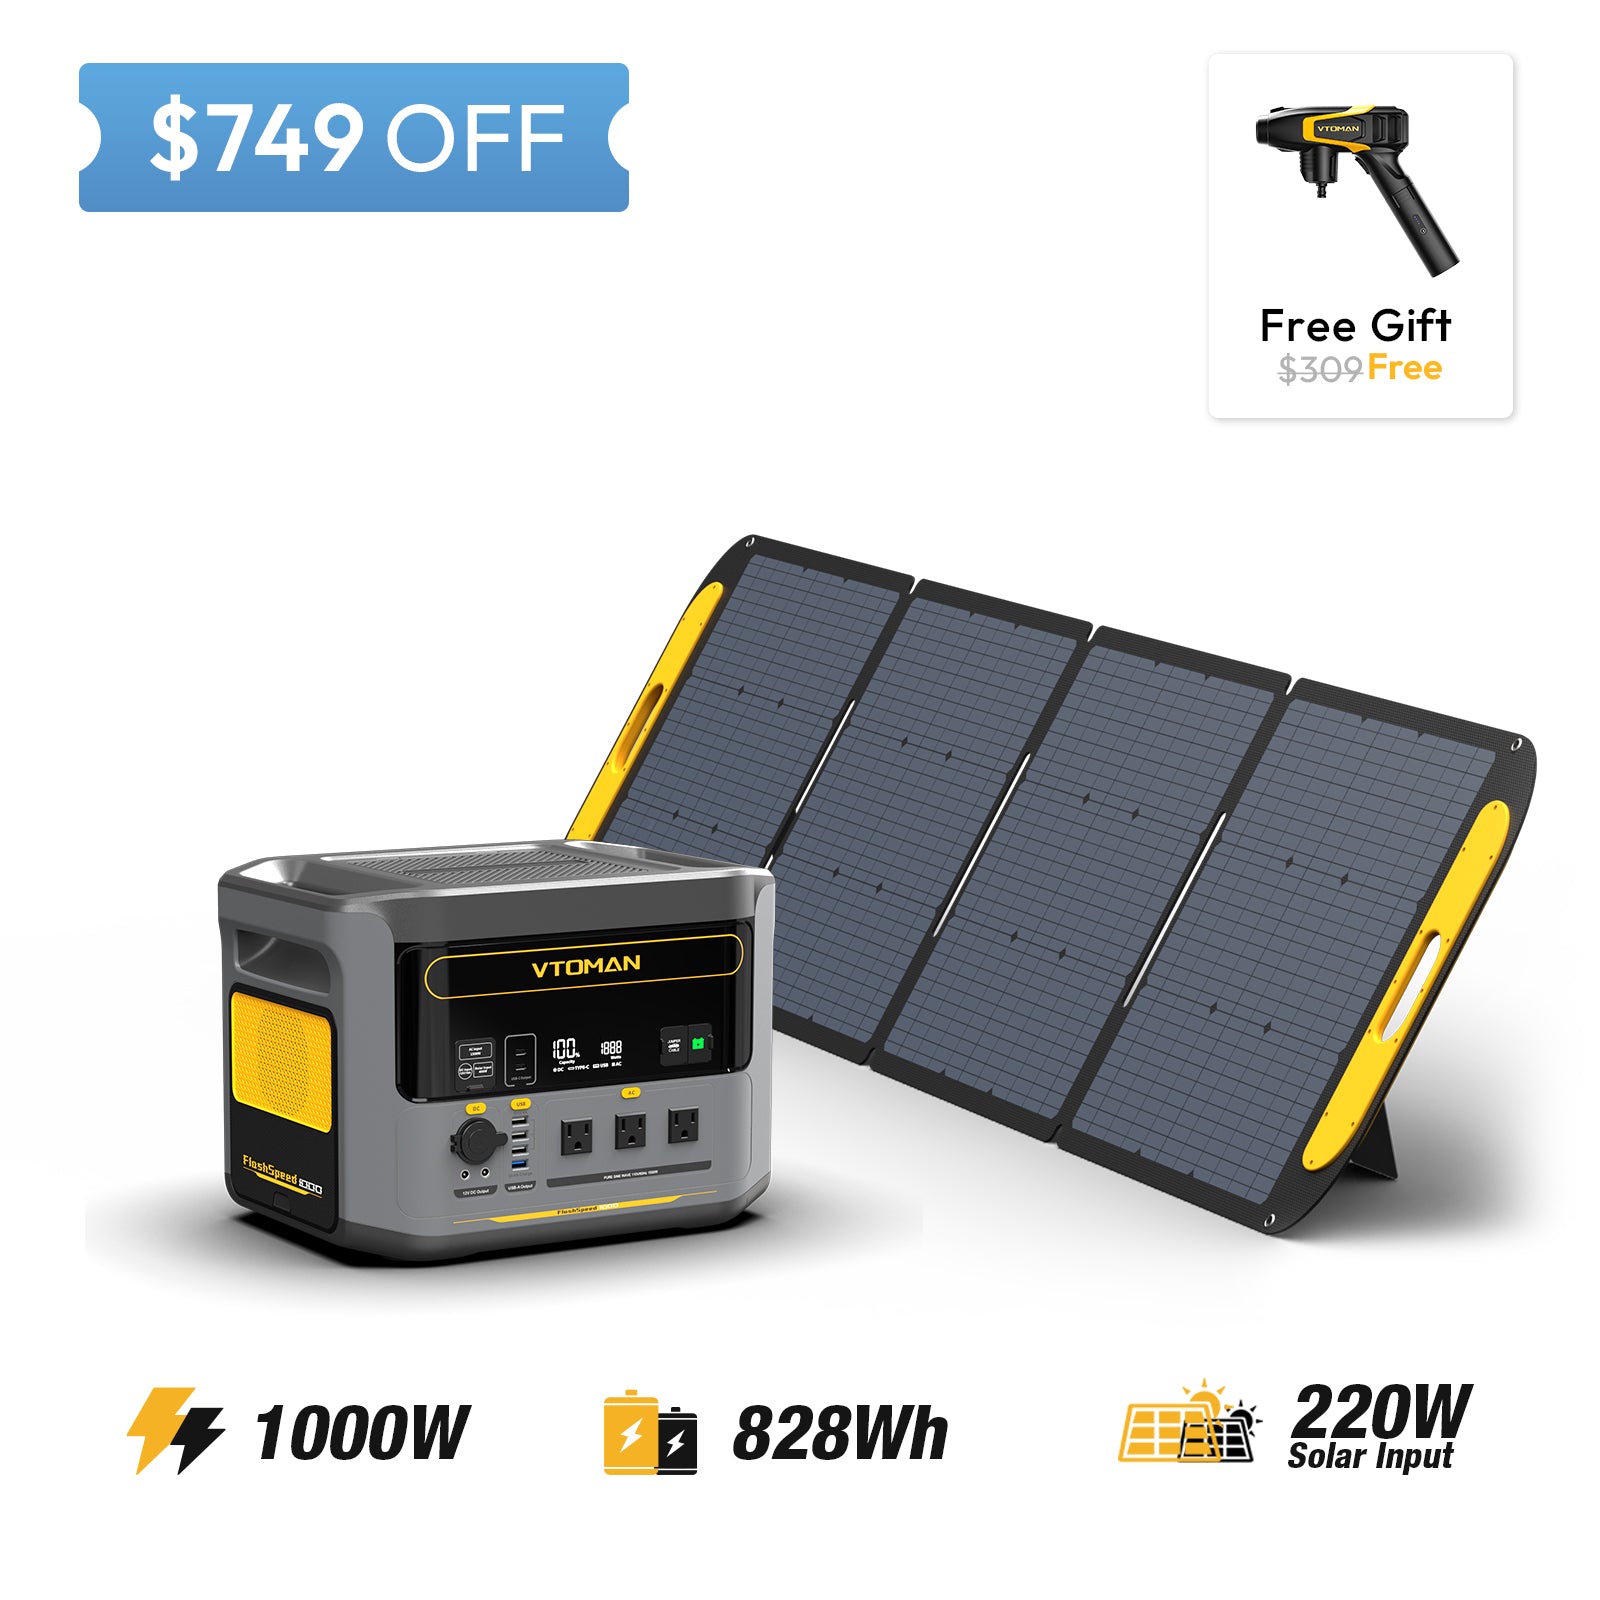 FlashSpeed 1000 and 220W solar panel save $749 in summer sale